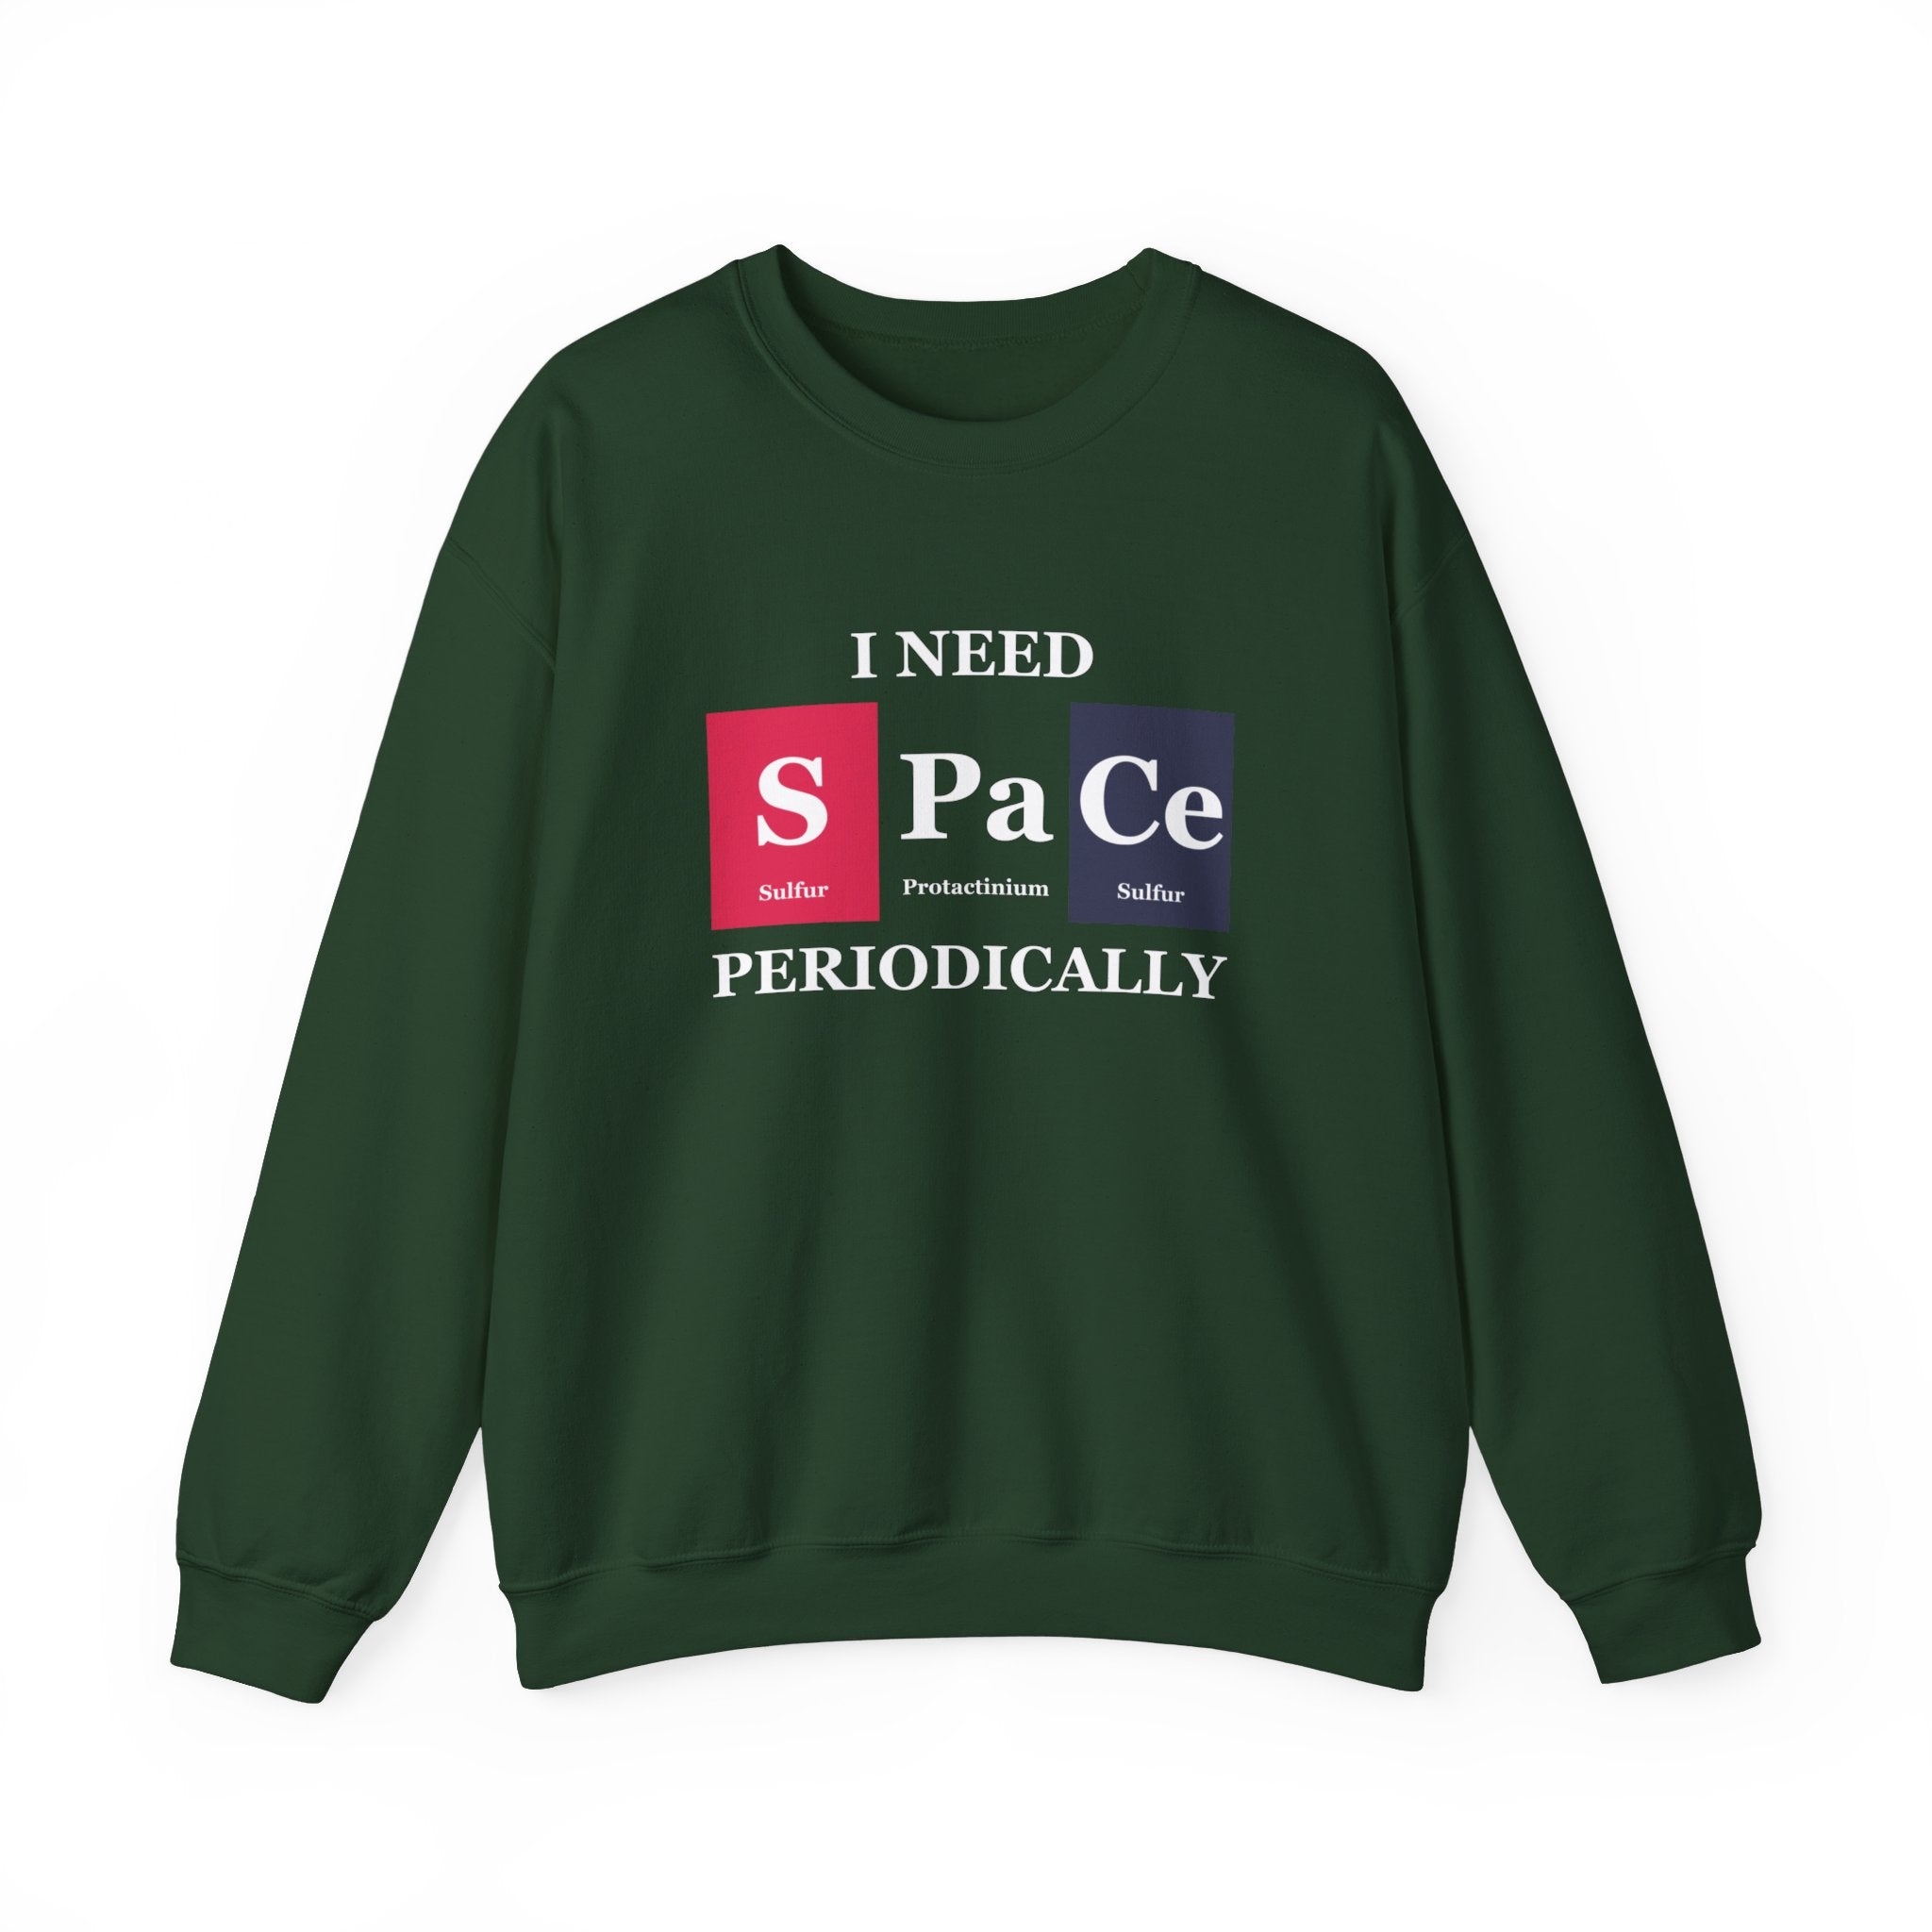 A dark green S-Pa-Ce - Sweatshirt perfect for winter coziness, featuring text that says "I need space periodically," with "space" cleverly represented using the periodic table elements Sulfur (S), Protactinium (Pa), and Cerium (Ce).